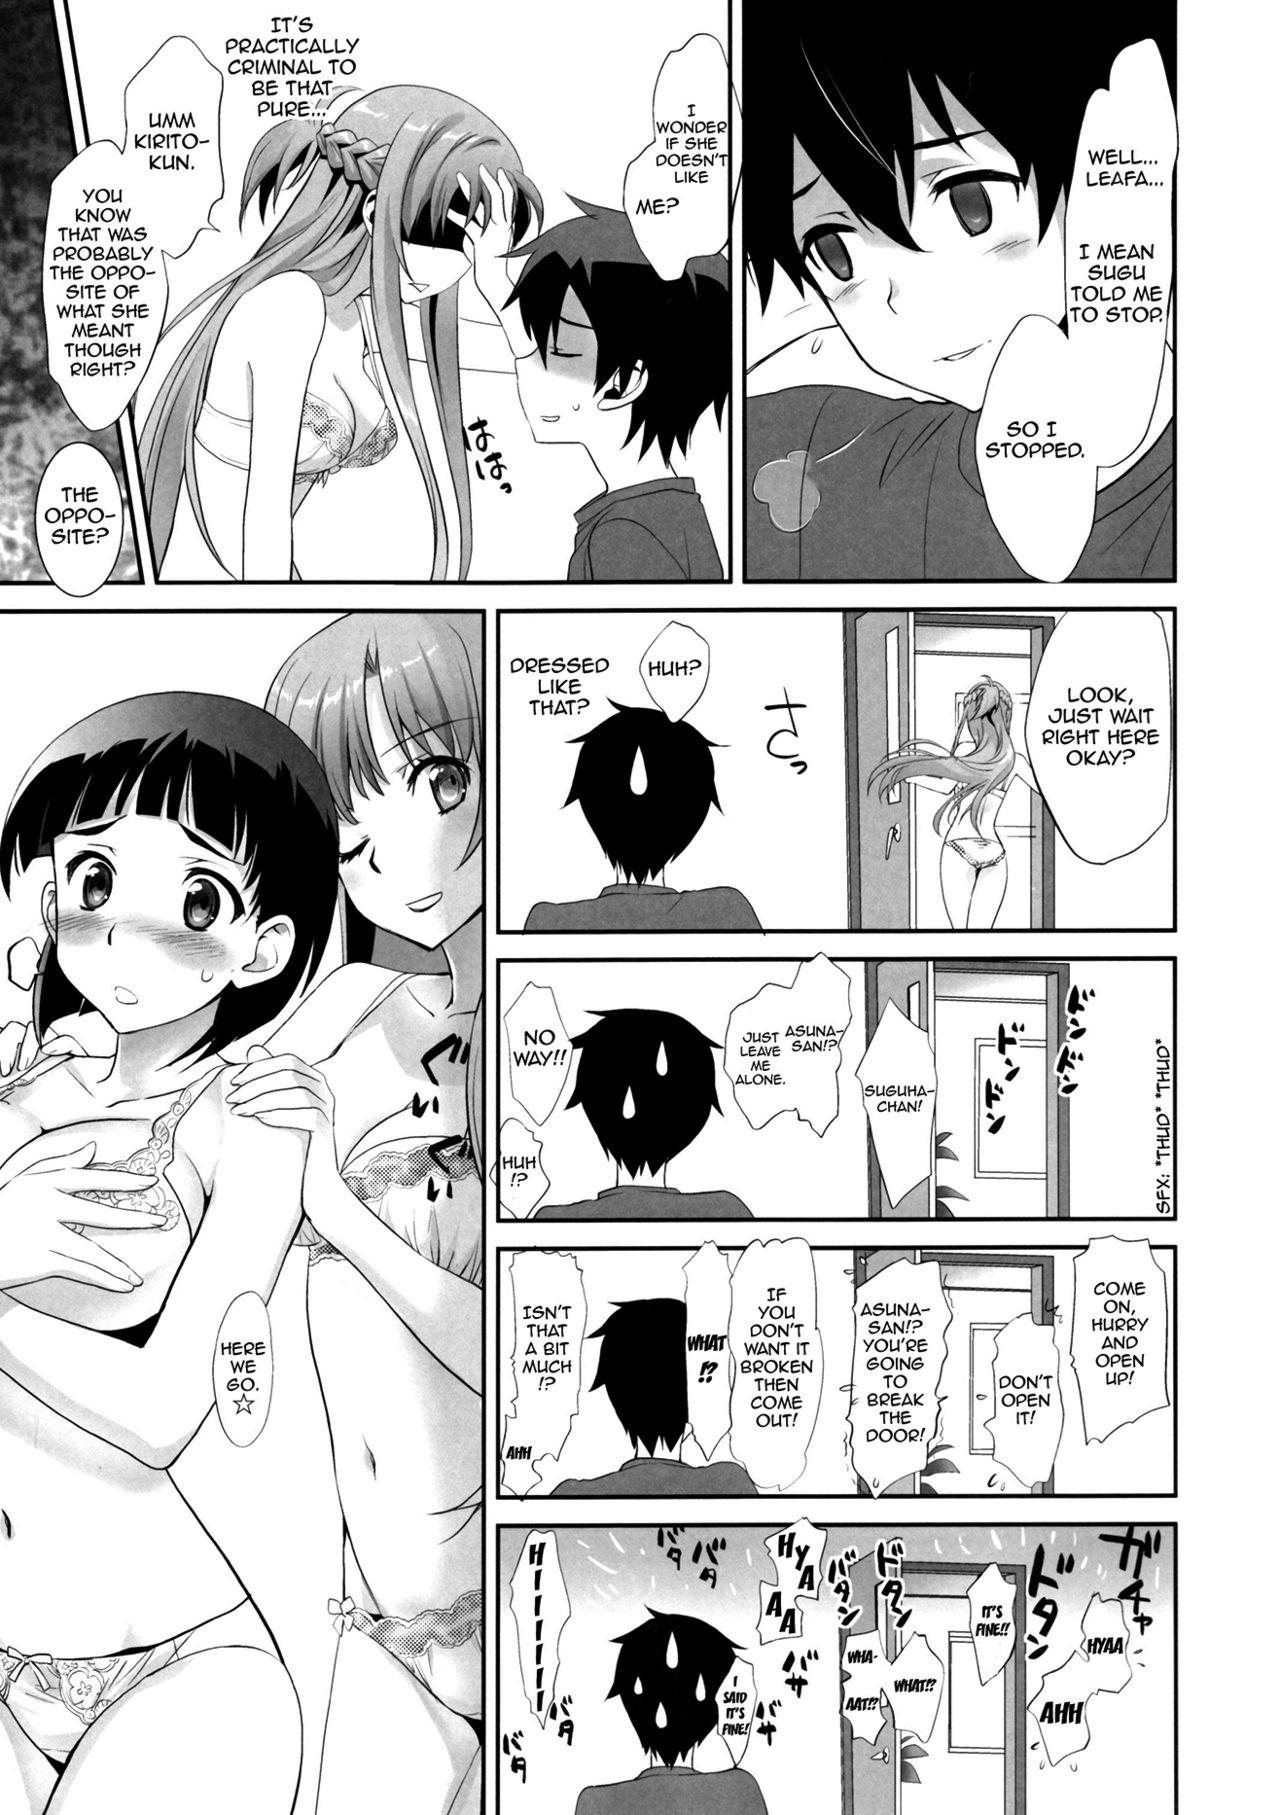 Gay Studs Sunny-side up? - Sword art online 3some - Page 12